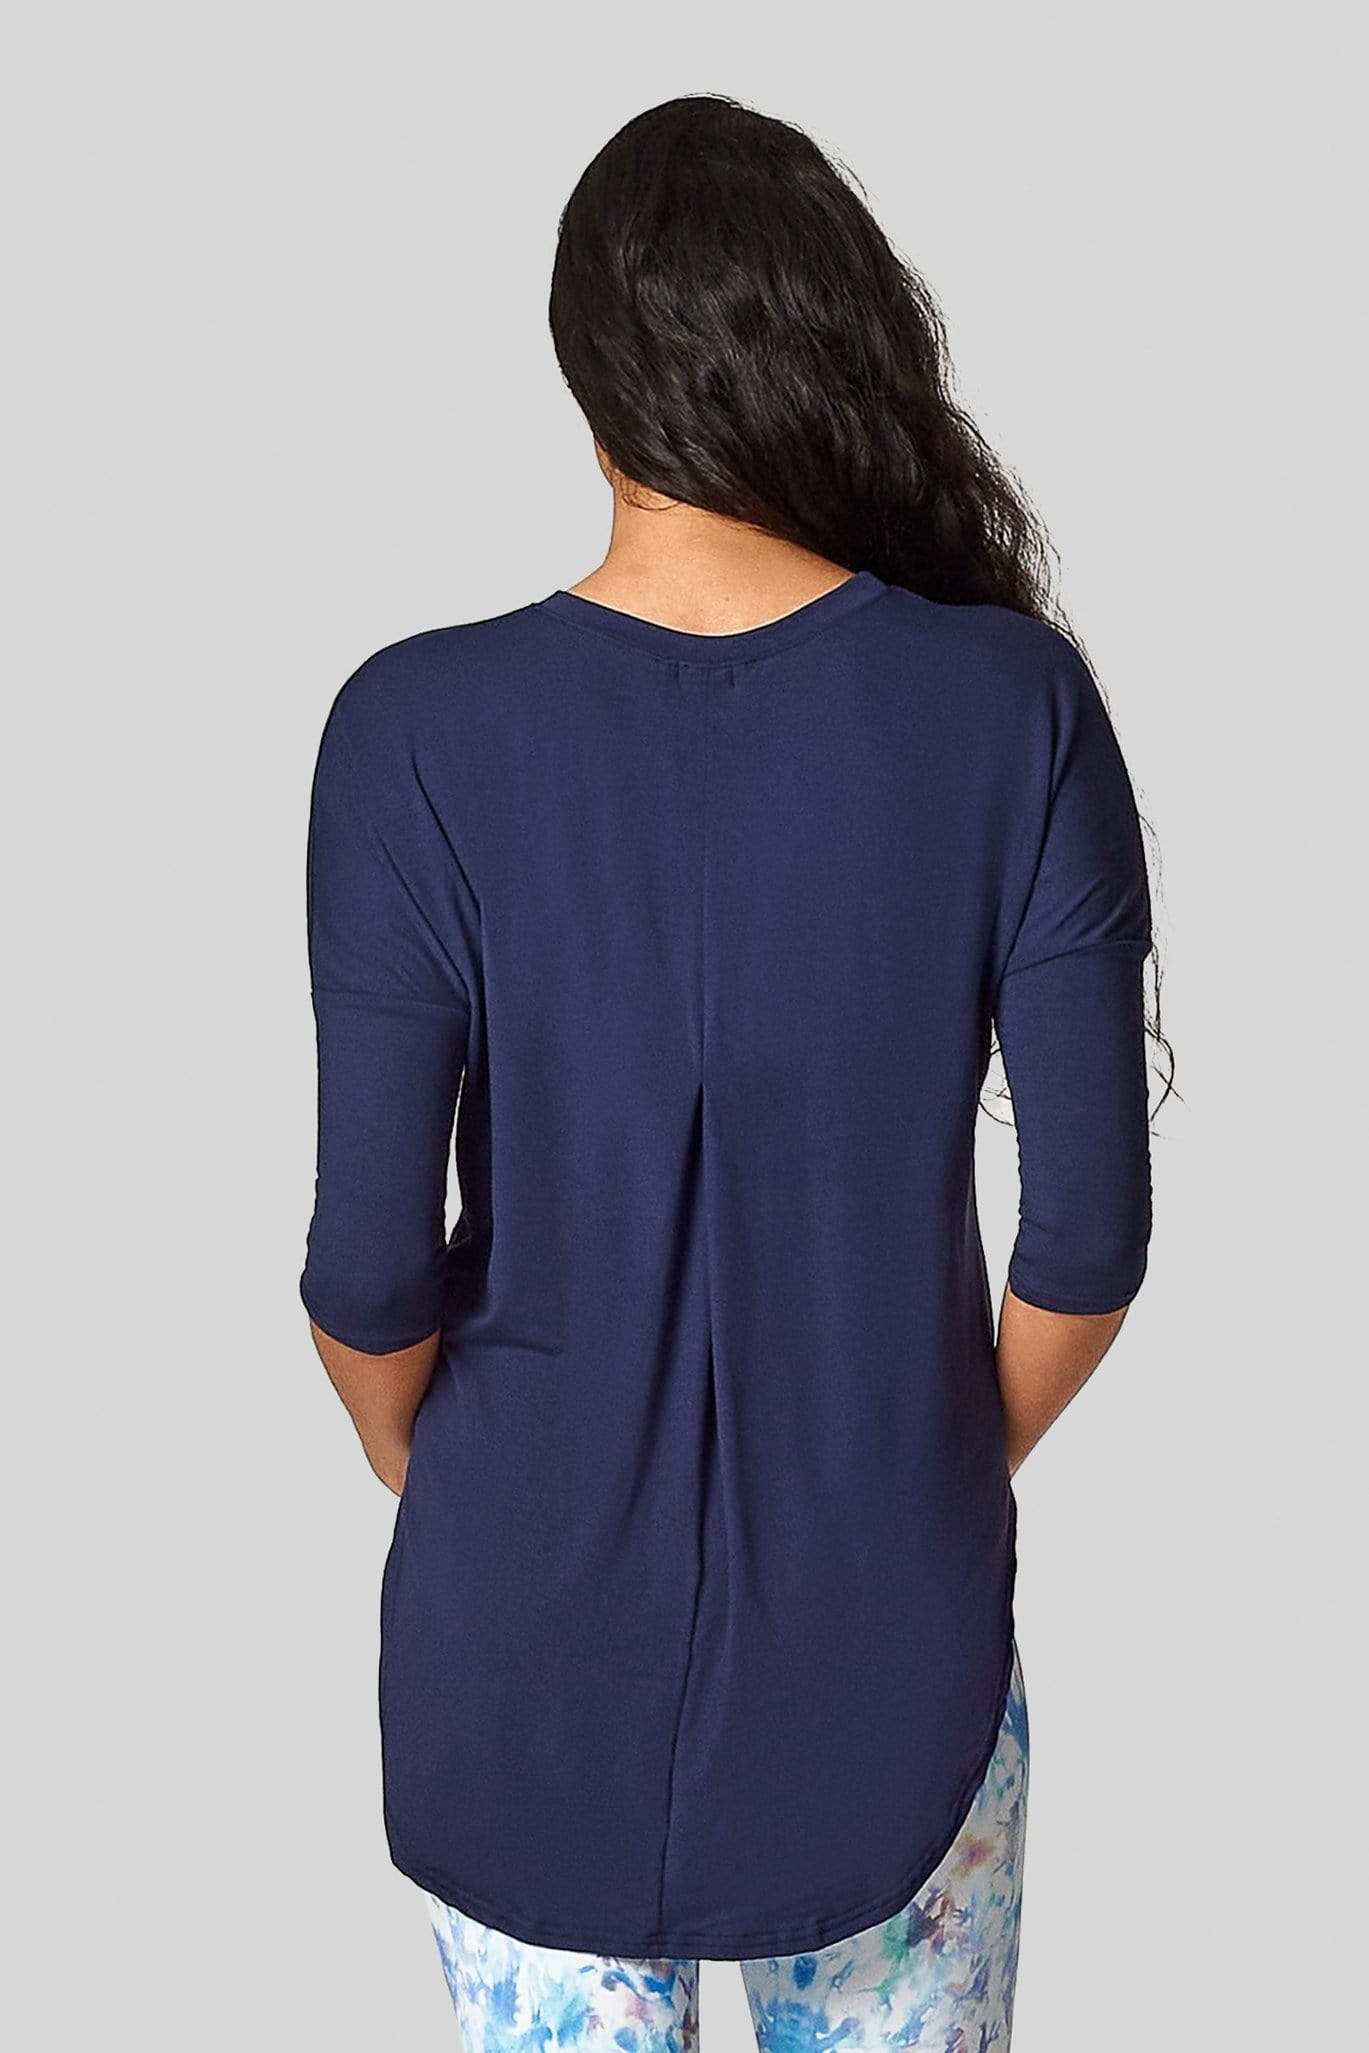 A woman's back faces the camera and she wears a blue 3/4 length tee shirt with a pleat in the back.